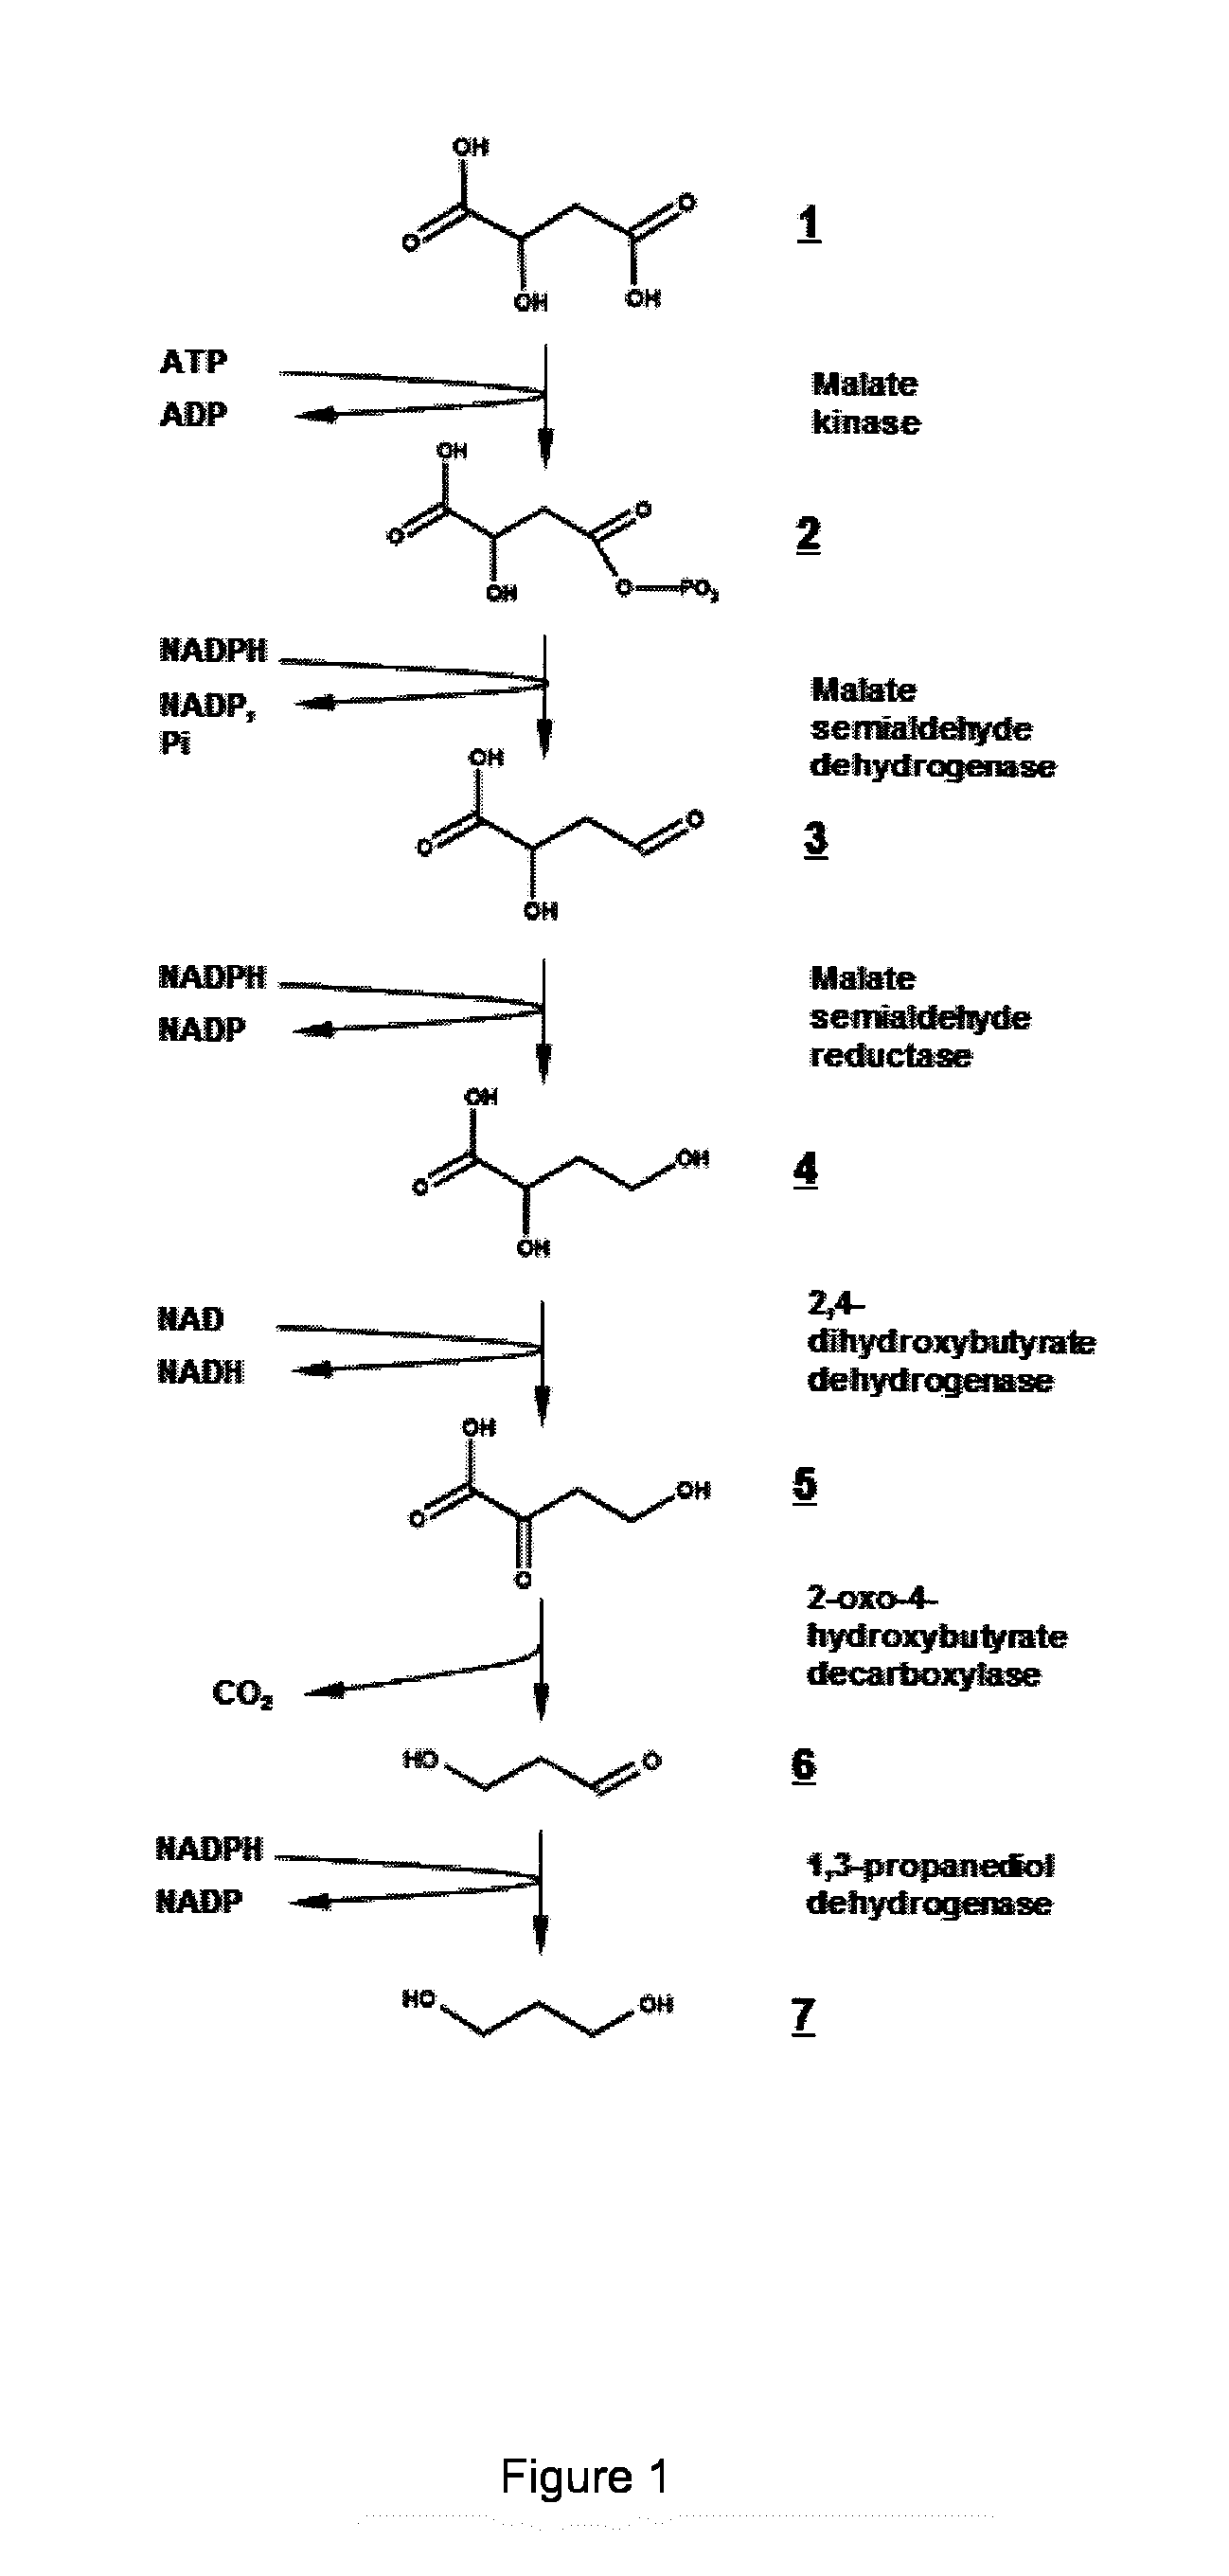 Microorganism modified for the production of 1,3-propanediol